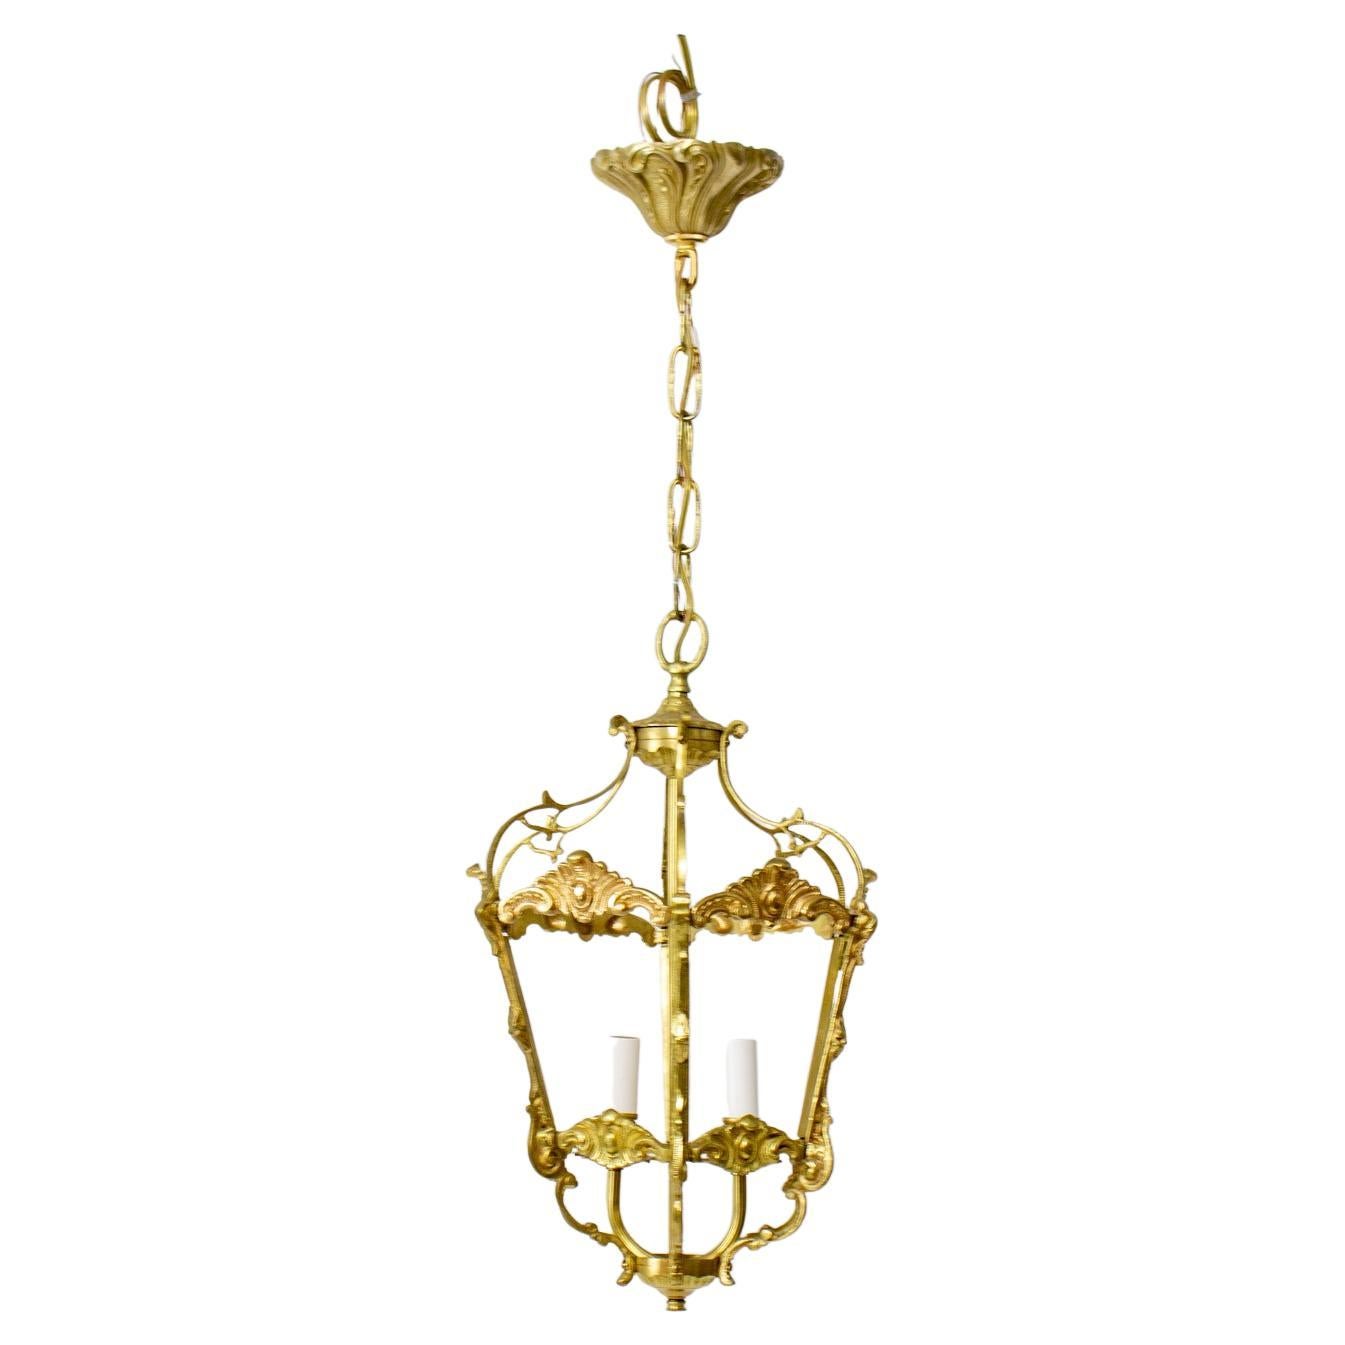 Early 20th Century Spanish Cast Brass Lantern For Sale